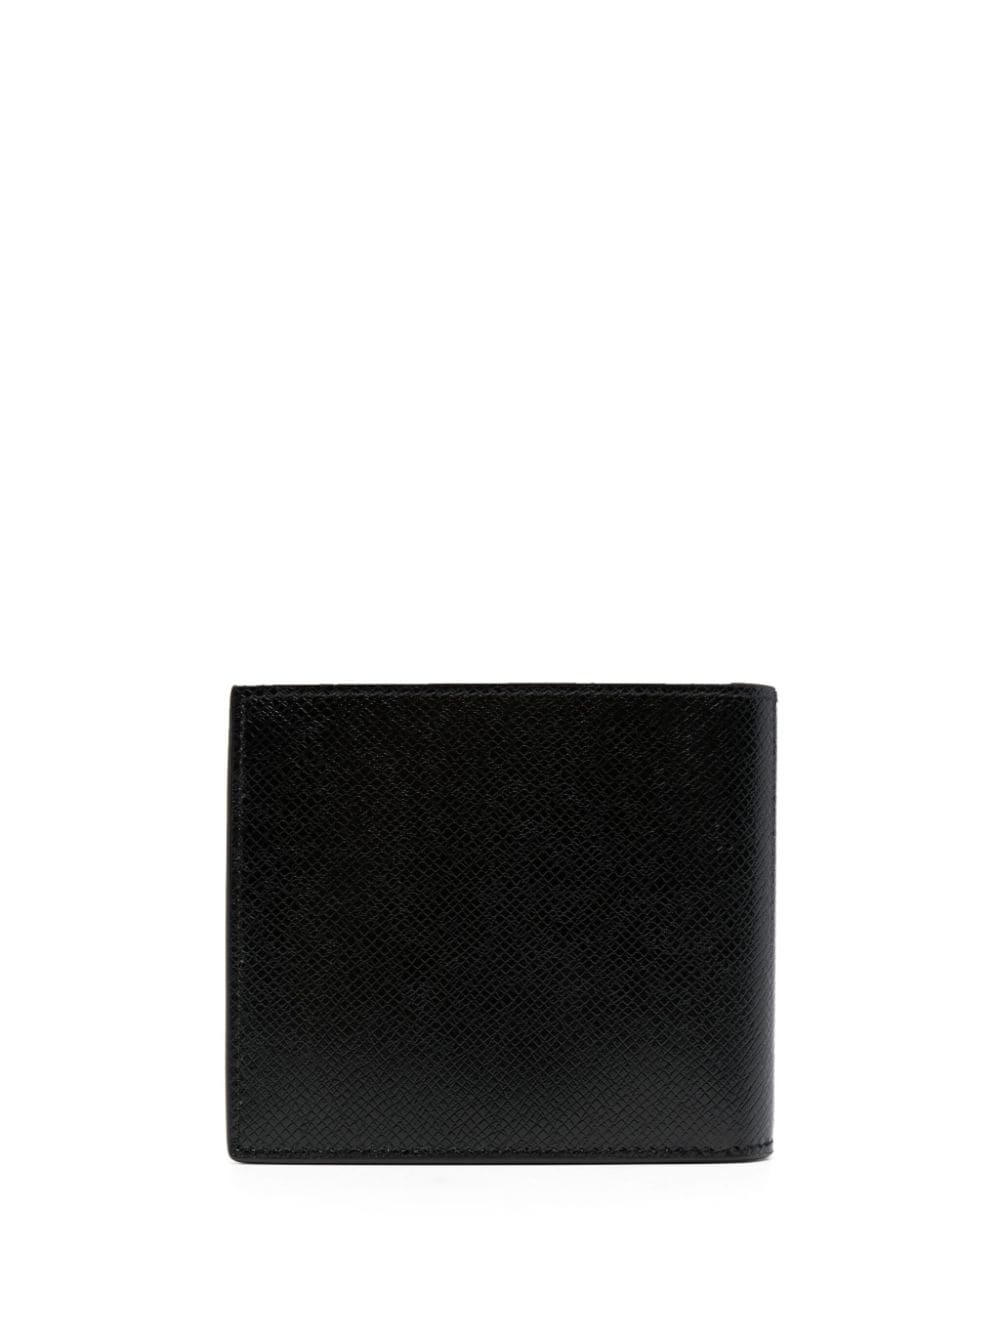 East/West grained leather wallet - 2